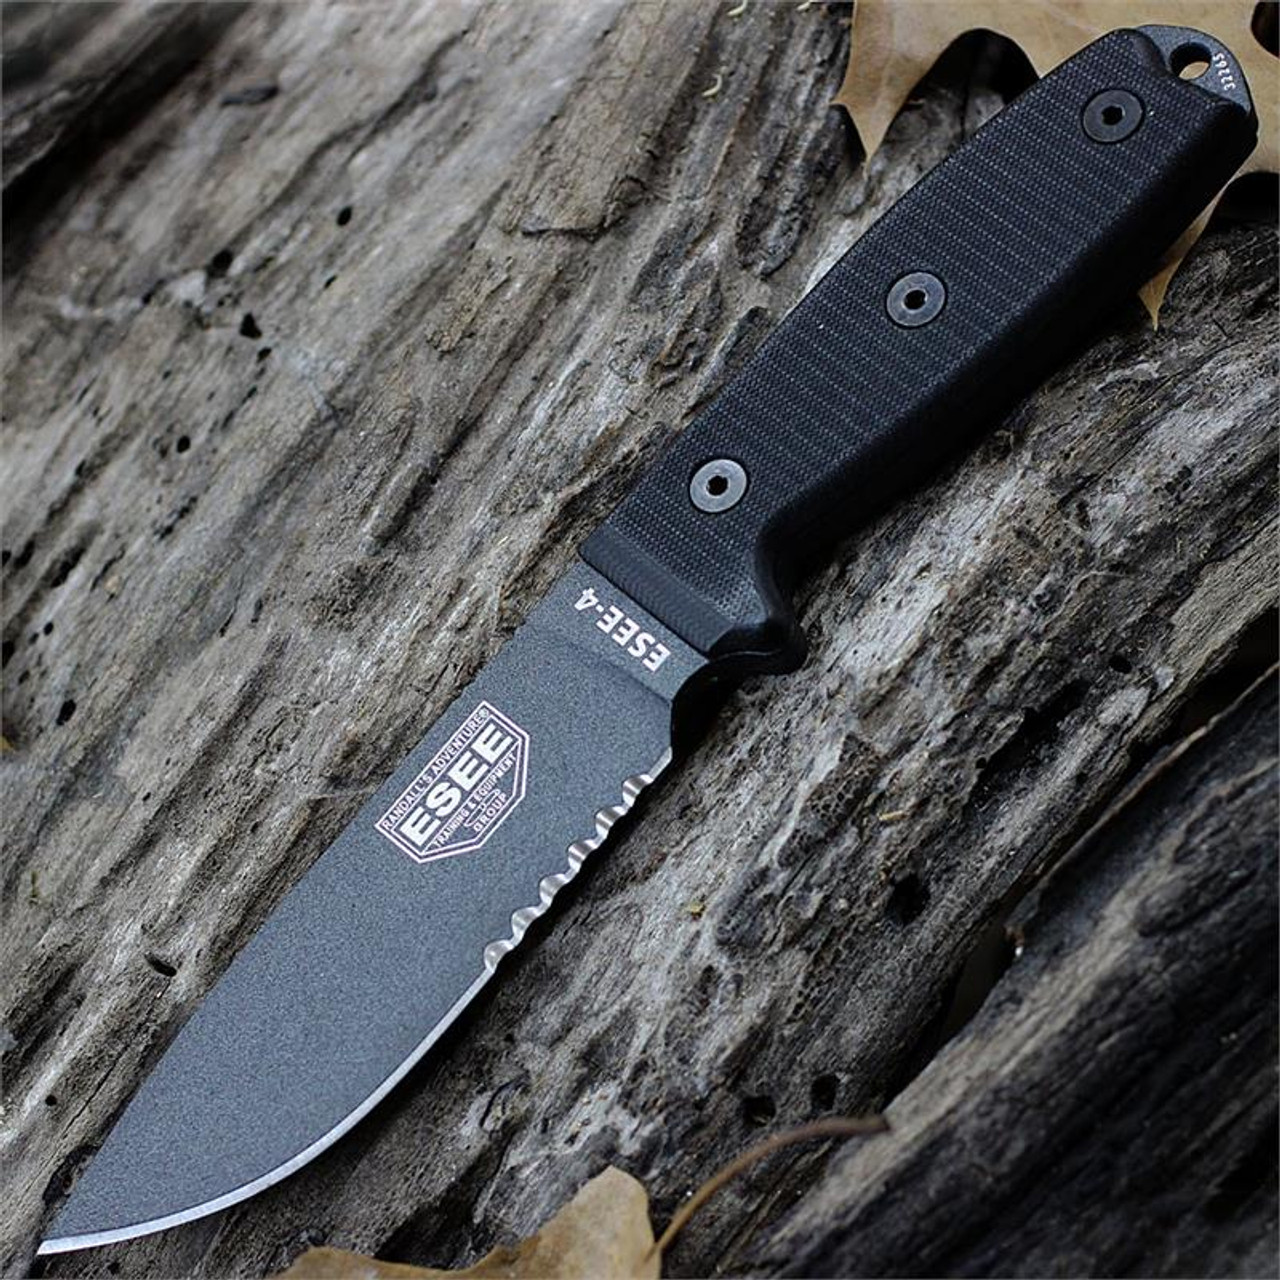 ESEE-4 Fixed Blade Knife (ESEE-4S-TG-B)- 4.50" Tactical Gray Partially Serrated 1095 Drop Point Blade, Black G-10 Handle